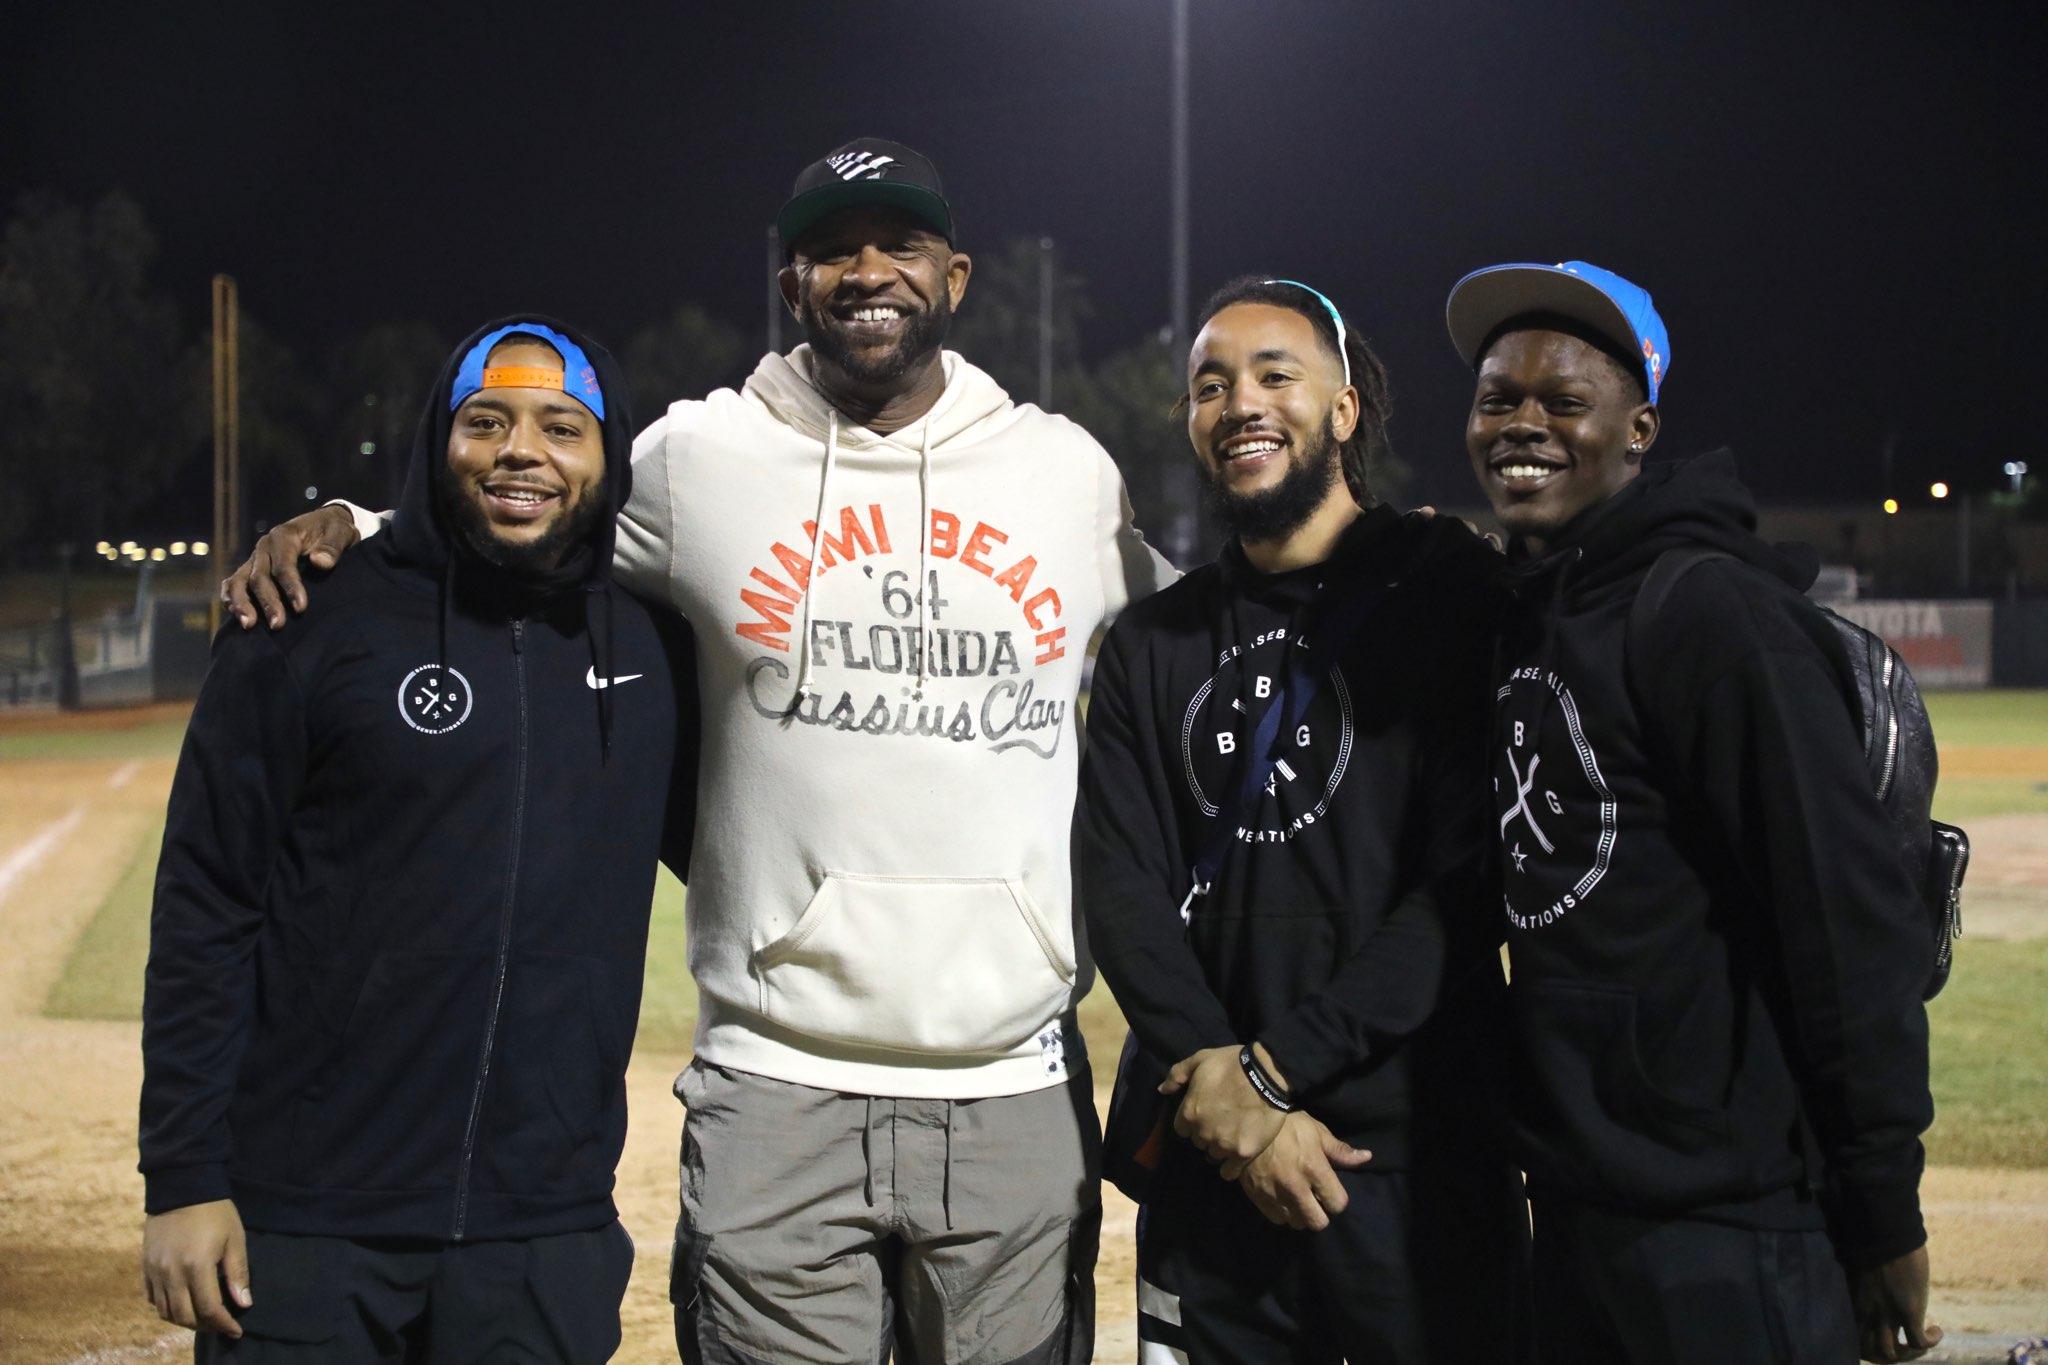 Dom Smith, CC Sabathia, JP Crawford and Jazz Chisholm at BBG All-Star Game. / Courtesy of Roc Nation